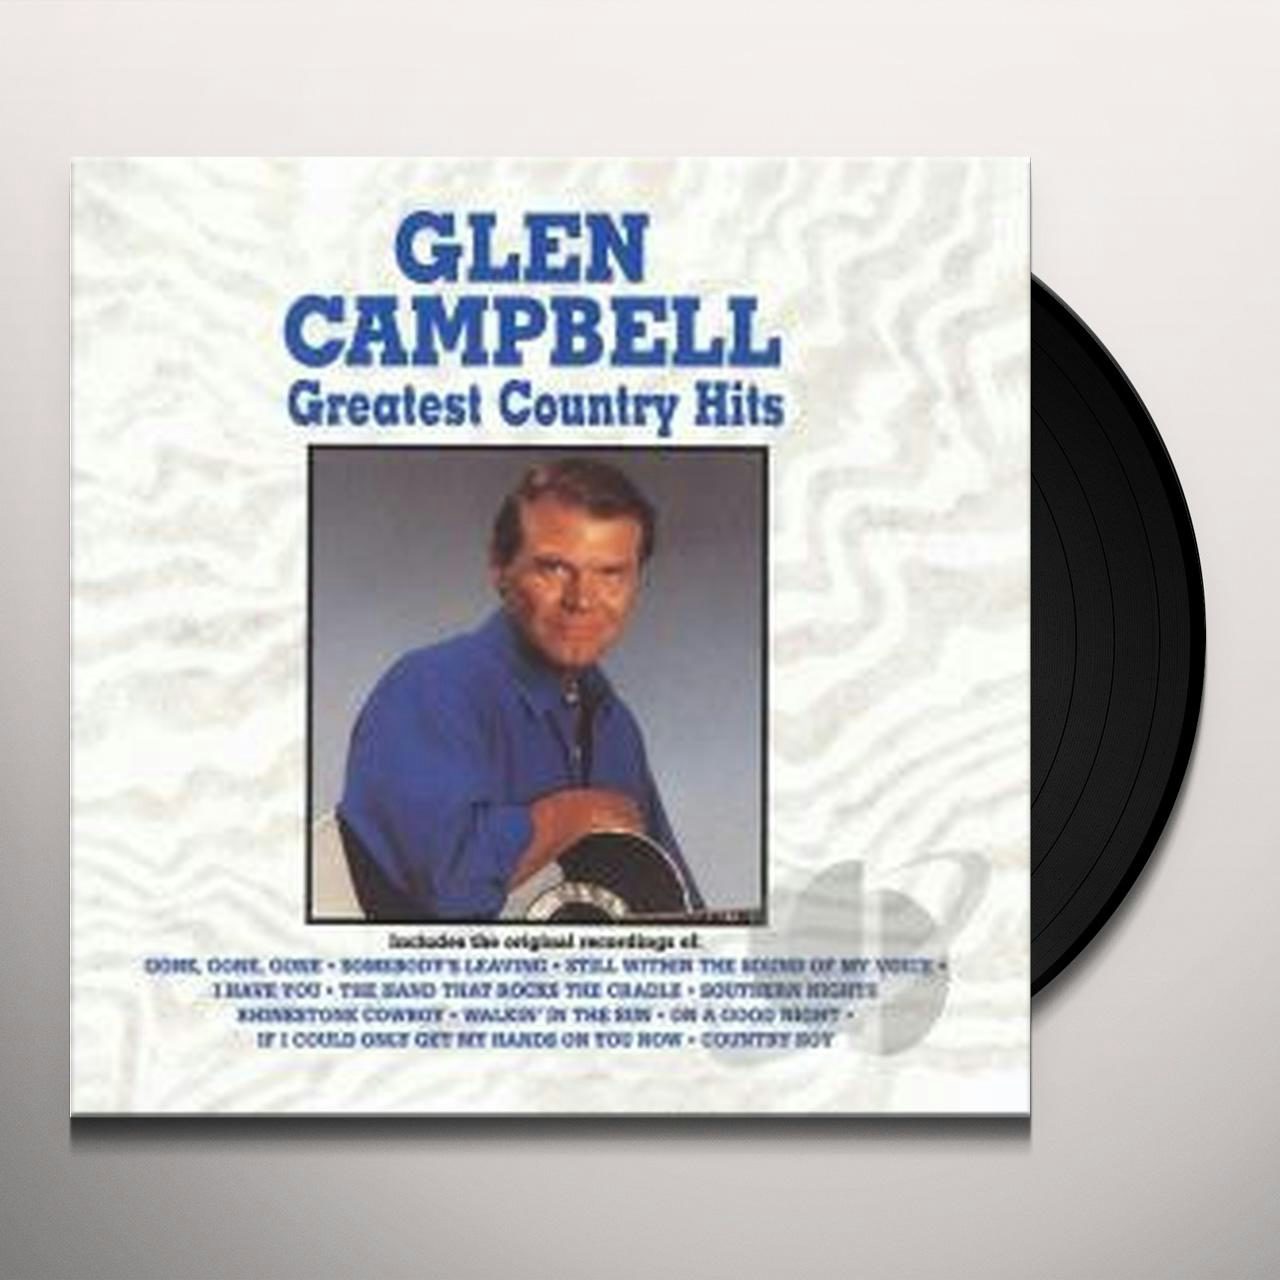 Greatest Country Hits Vinyl Record - Glen Campbell